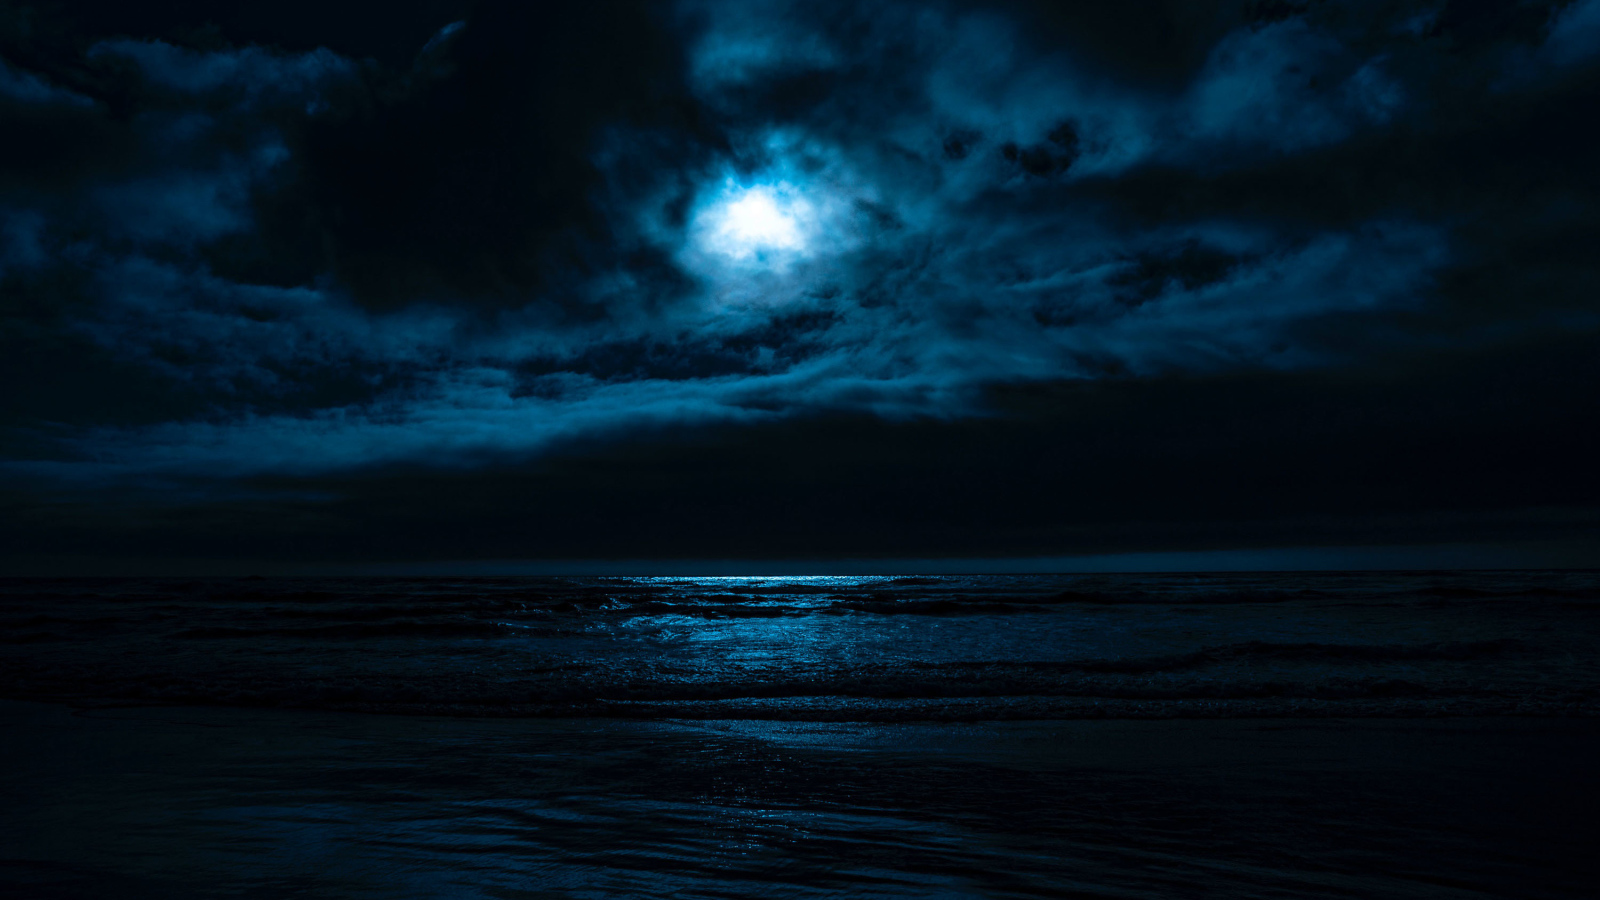 The moon in the cloudy sky over the sea at night